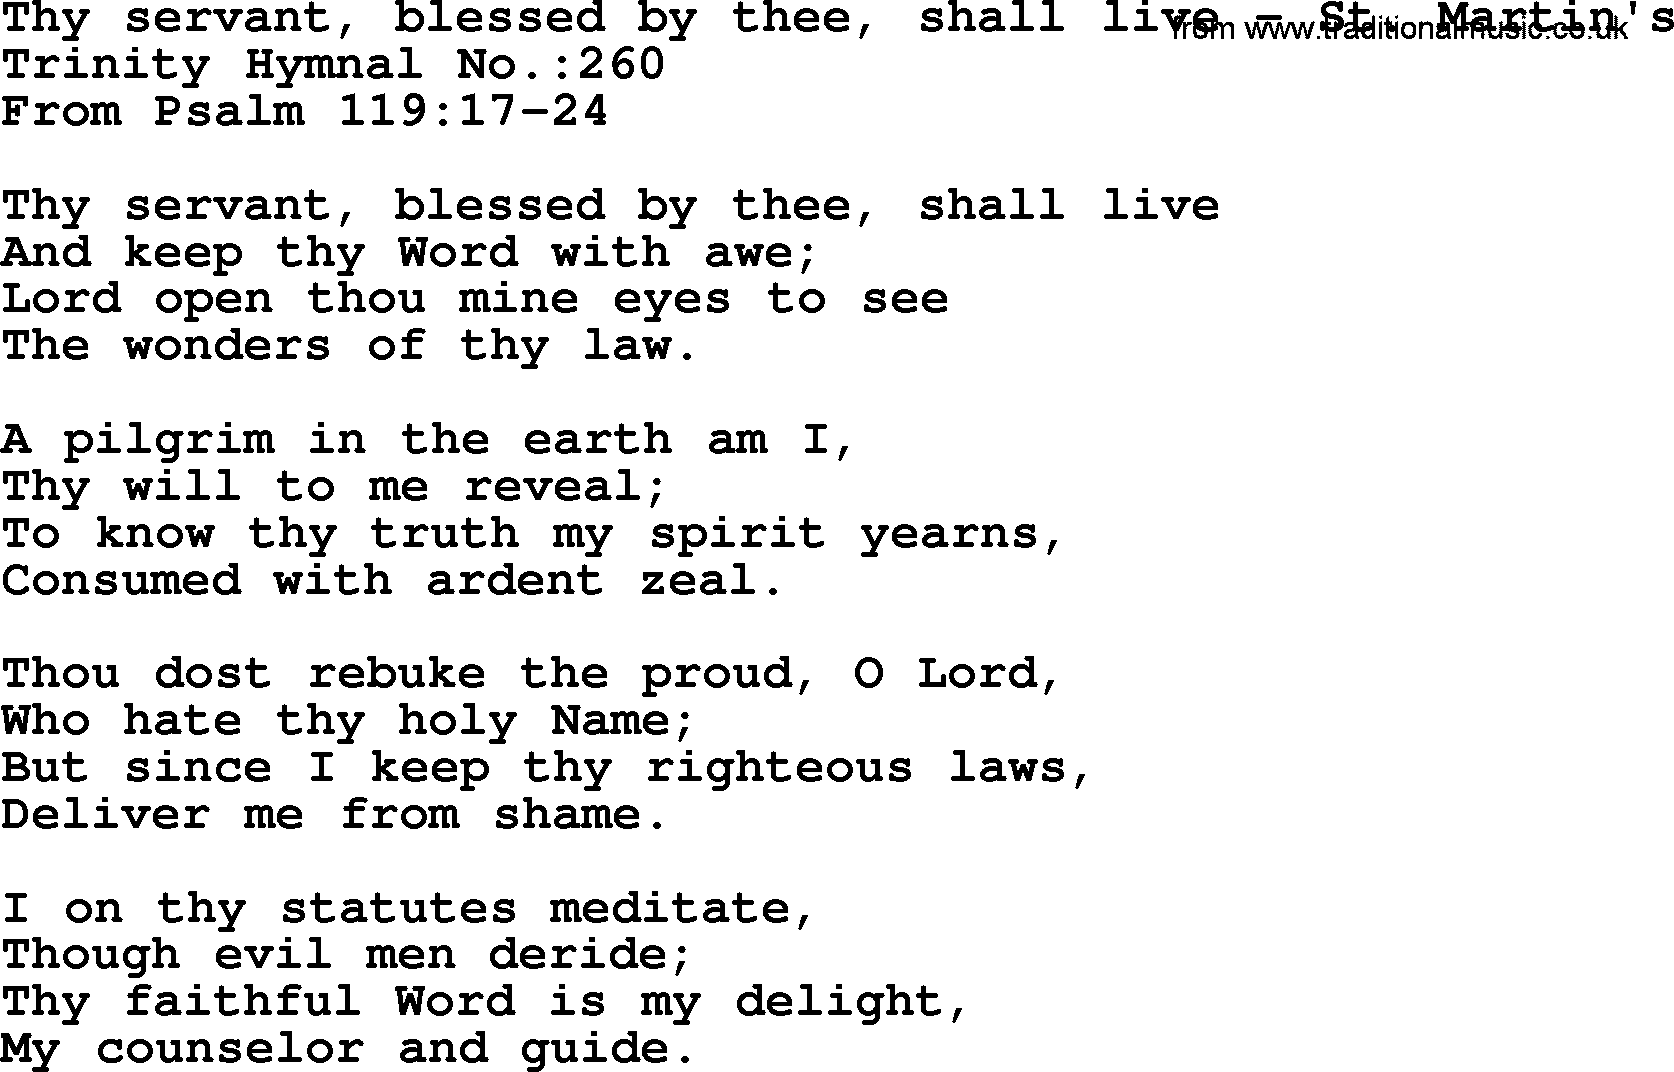 Trinity Hymnal Hymn: Thy Servant, Blessed By Thee, Shall Live--St. Martin's, lyrics with midi music